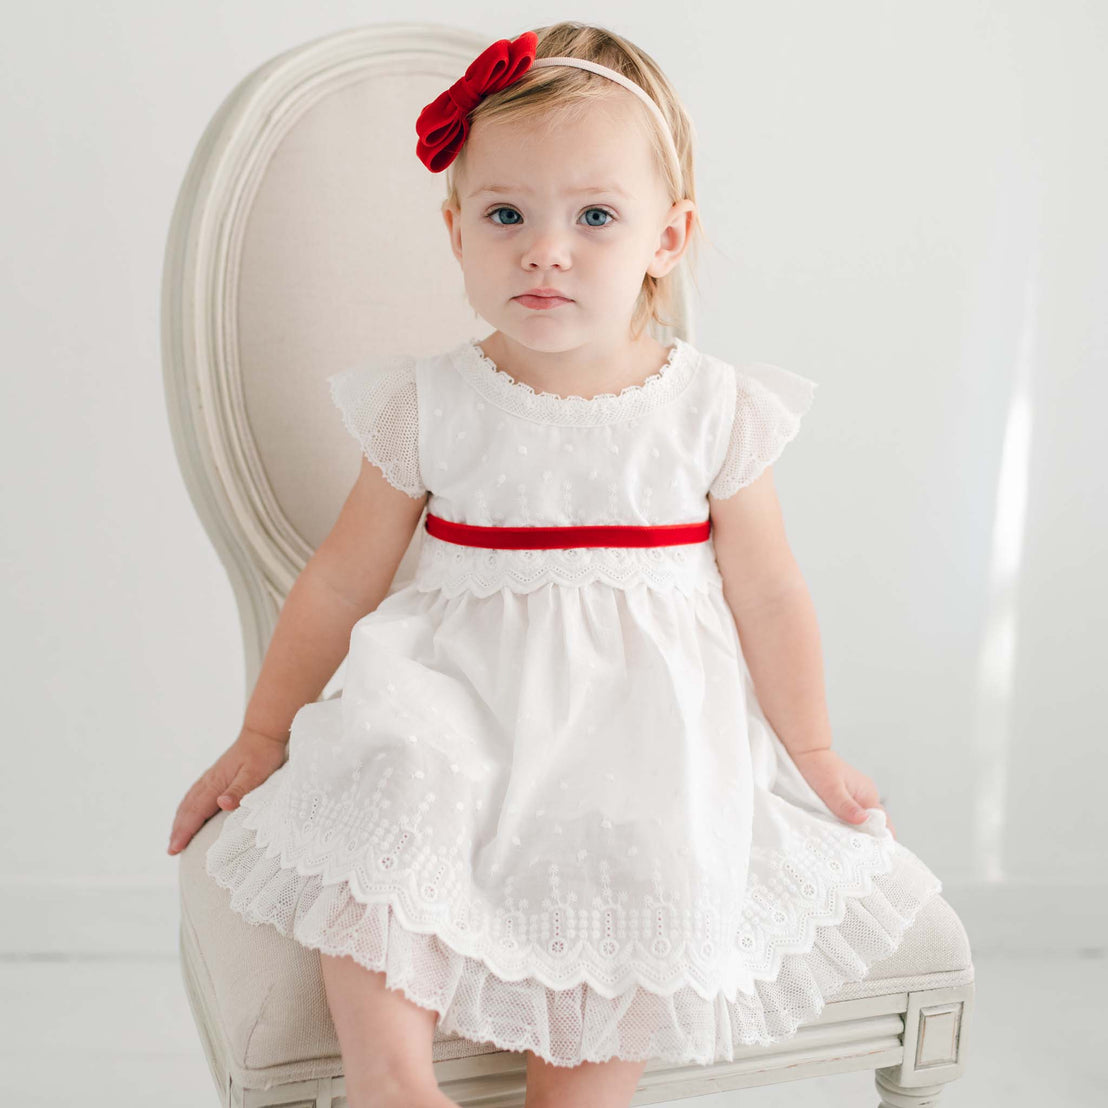 A toddler girl in a white christening dress with a red sash and an Emily Red Velvet Bow Headband sits on an ornate vintage chair, looking directly at the camera.